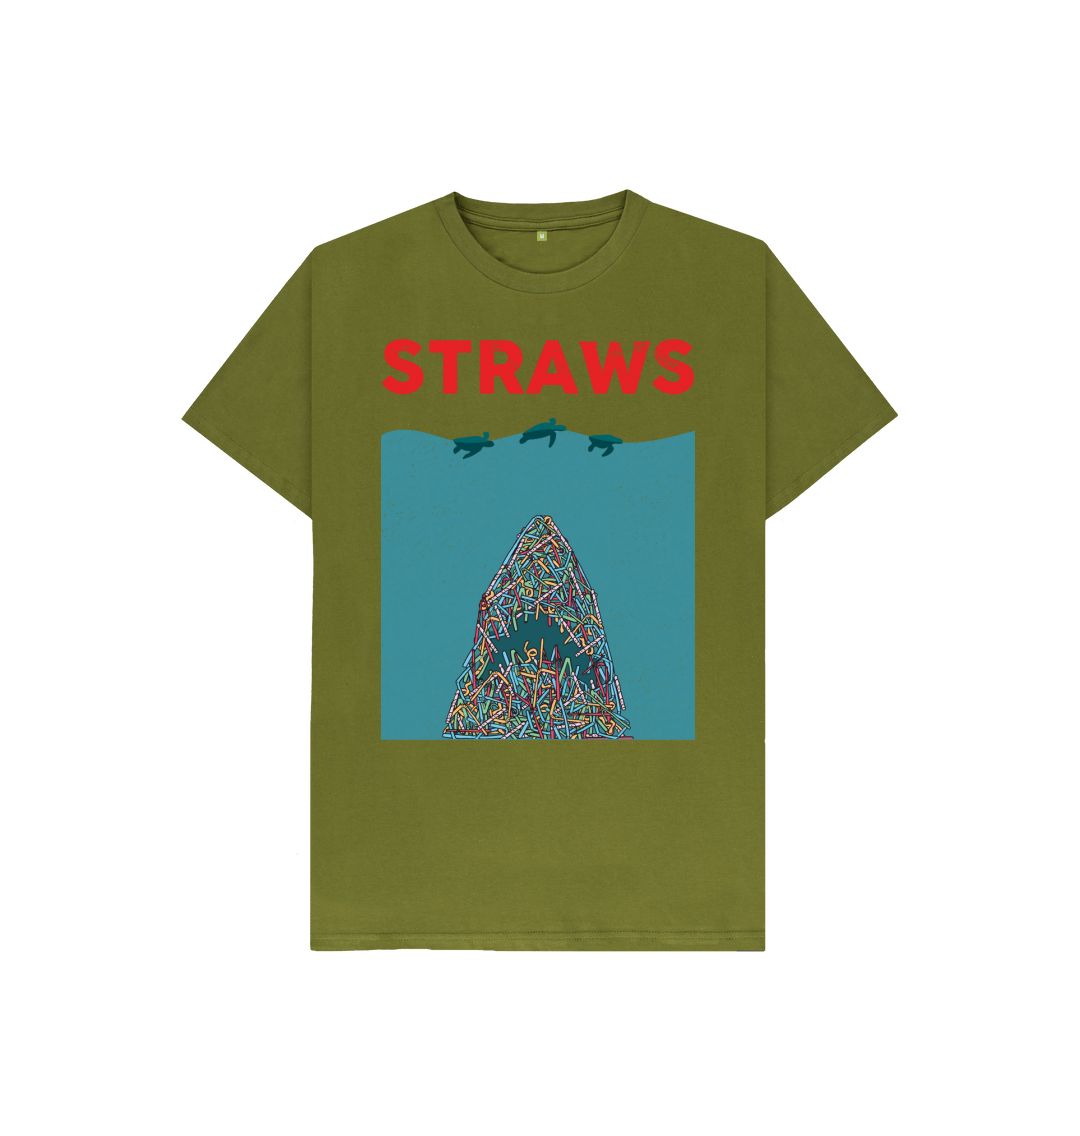 Moss Green Sustainable T-Shirt - Save Our Seas from Straws